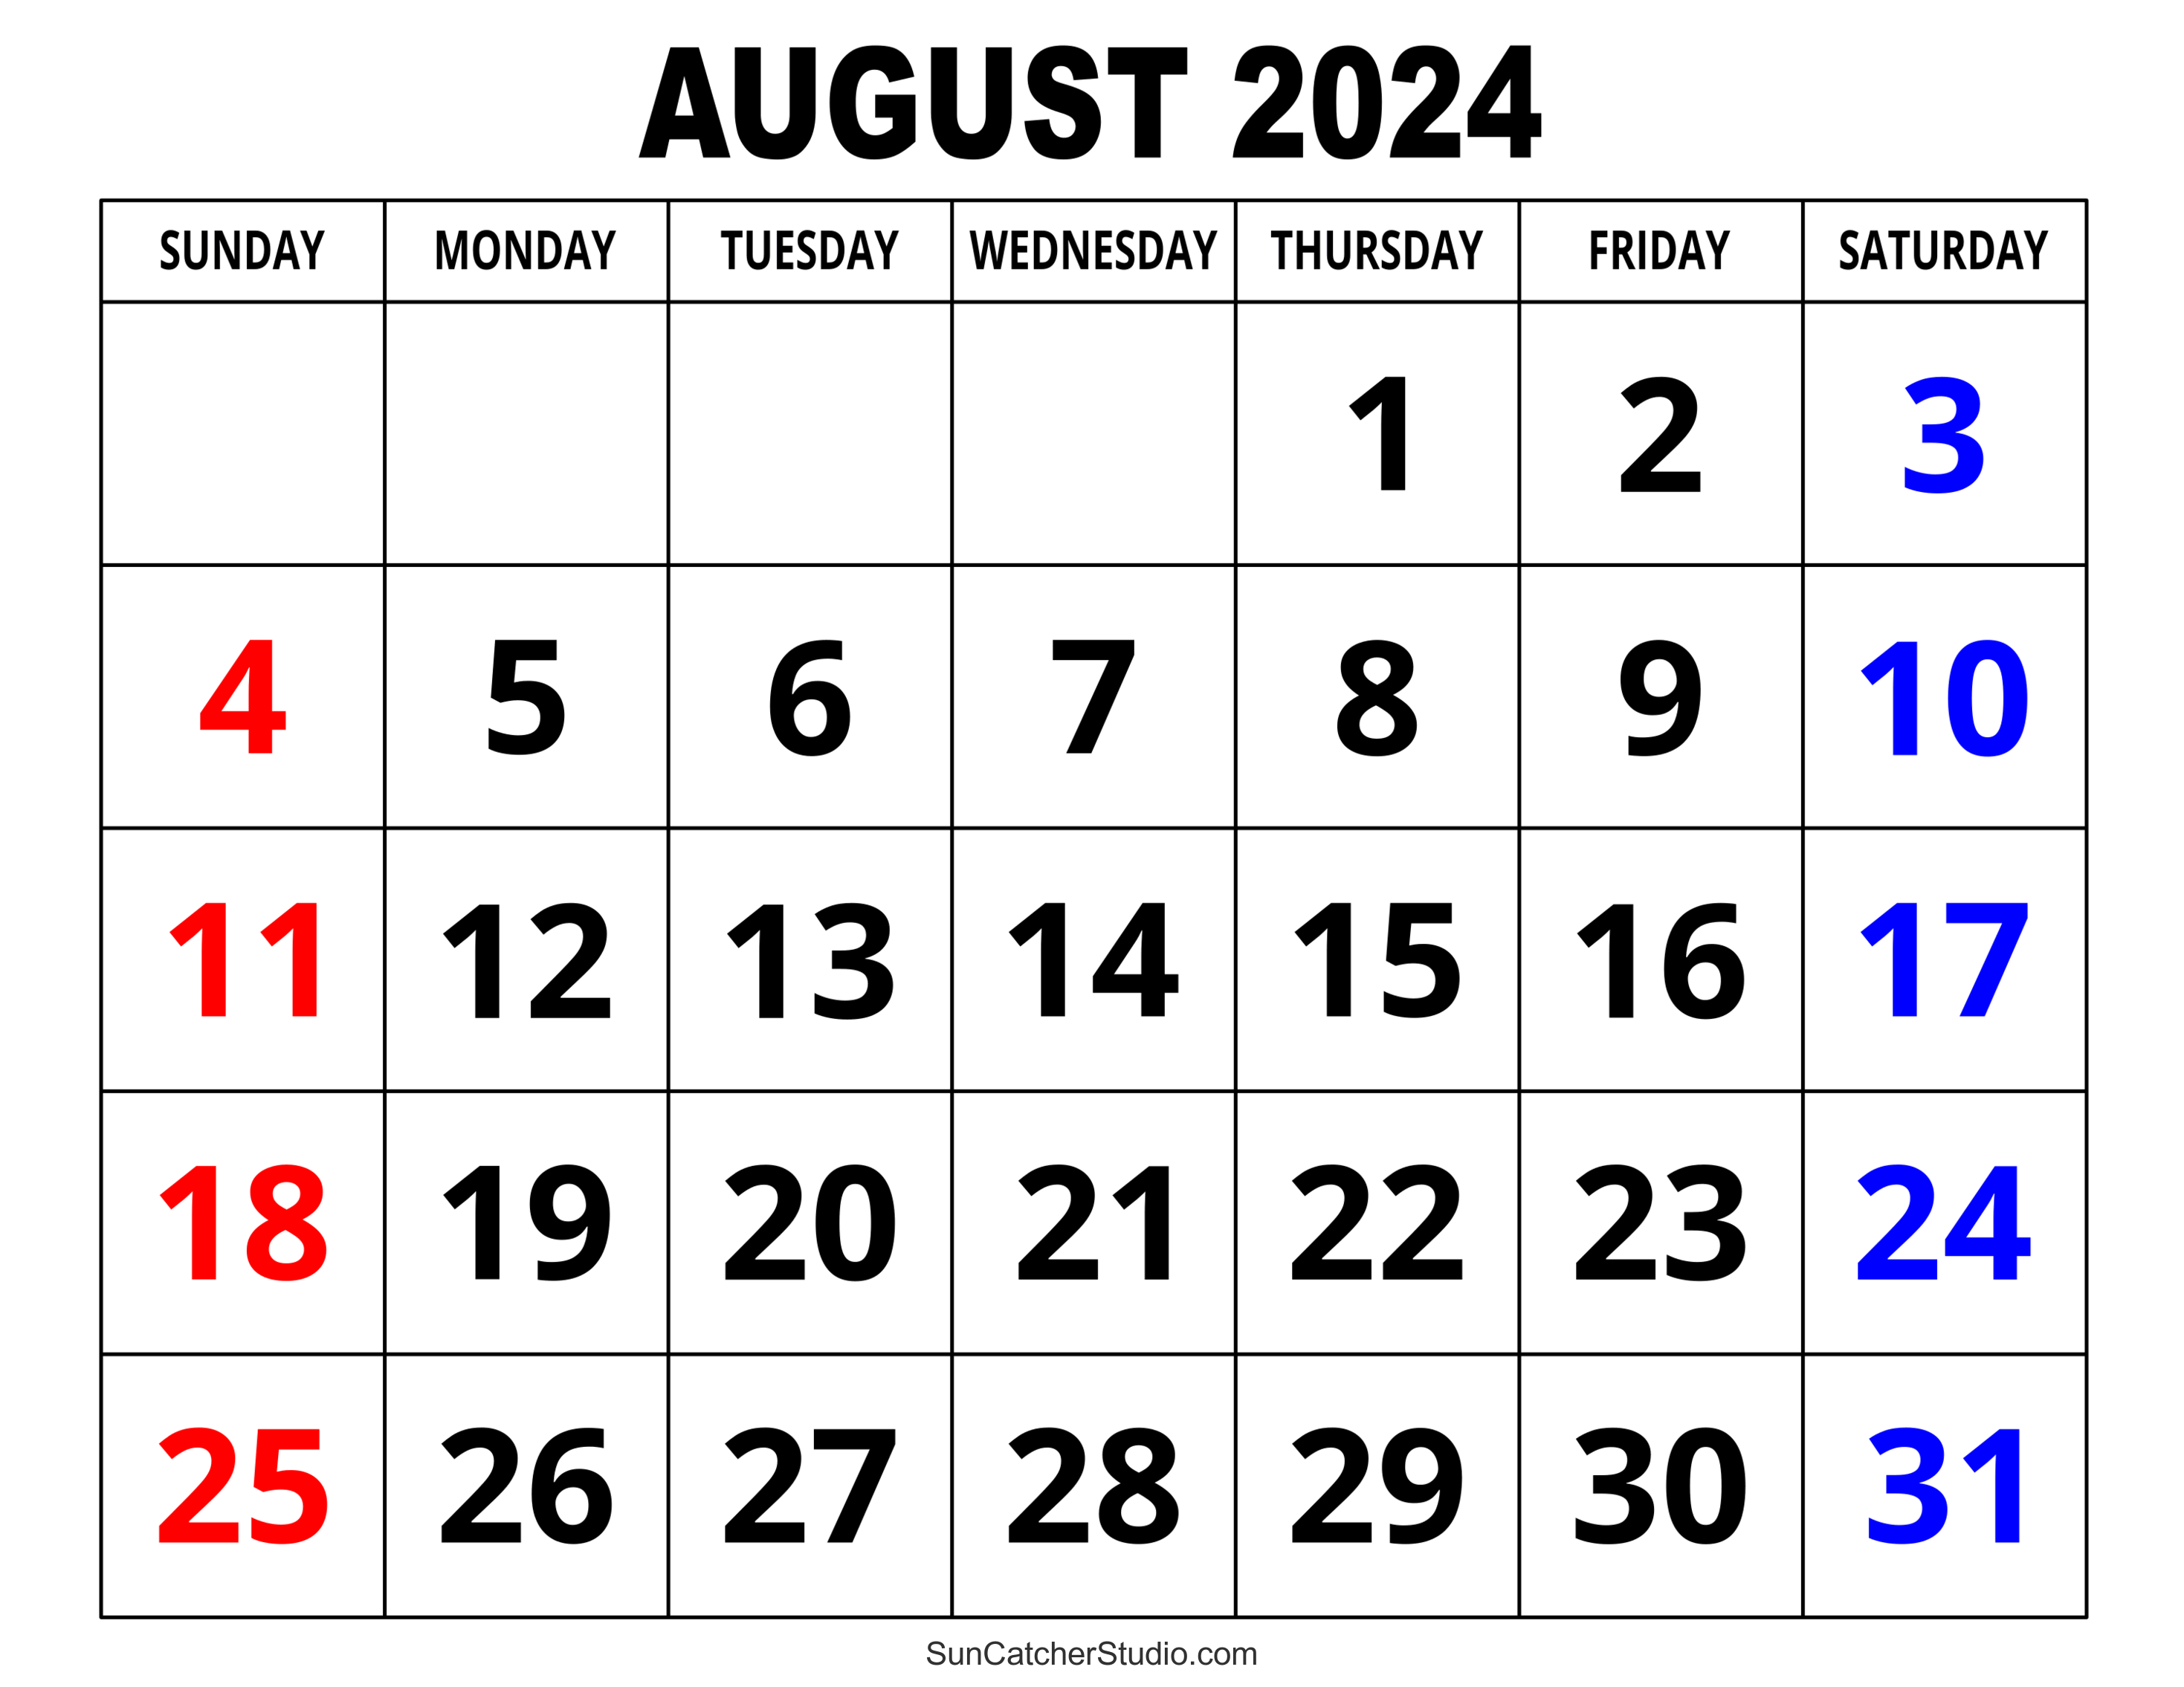 August 2024 Calendar (Free Printable) – Diy Projects, Patterns within Free Printable August 2024 Calendar Landscape